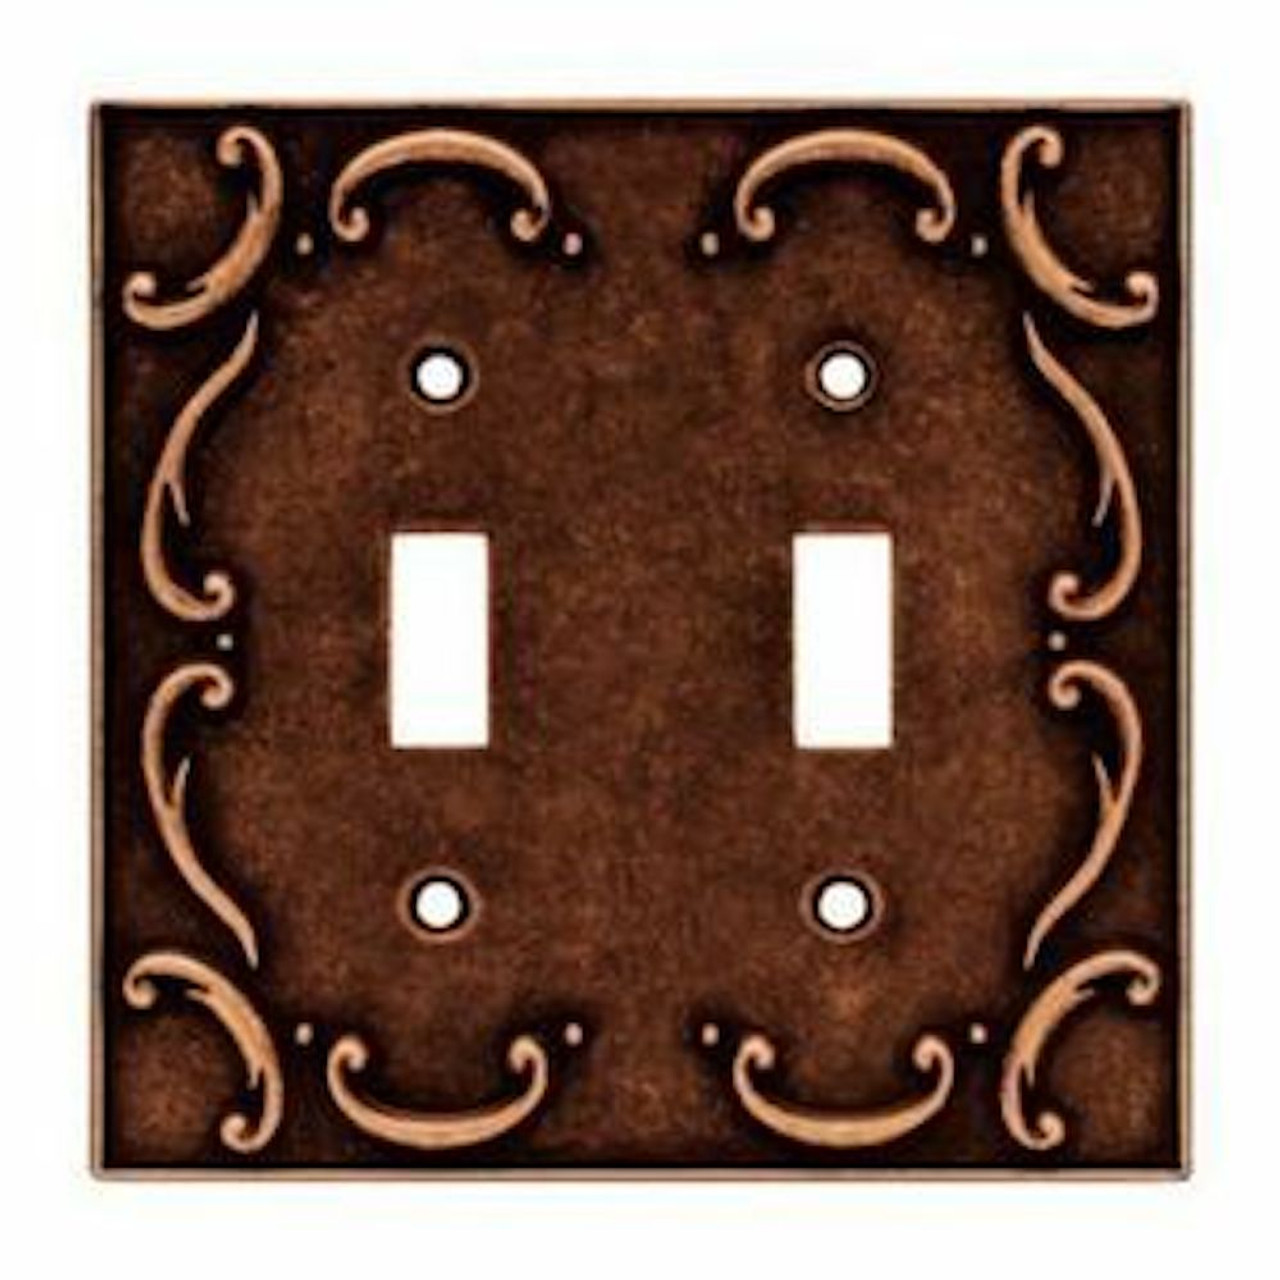 64262 Sponged Copper French Lace Double Switch Cover Plate